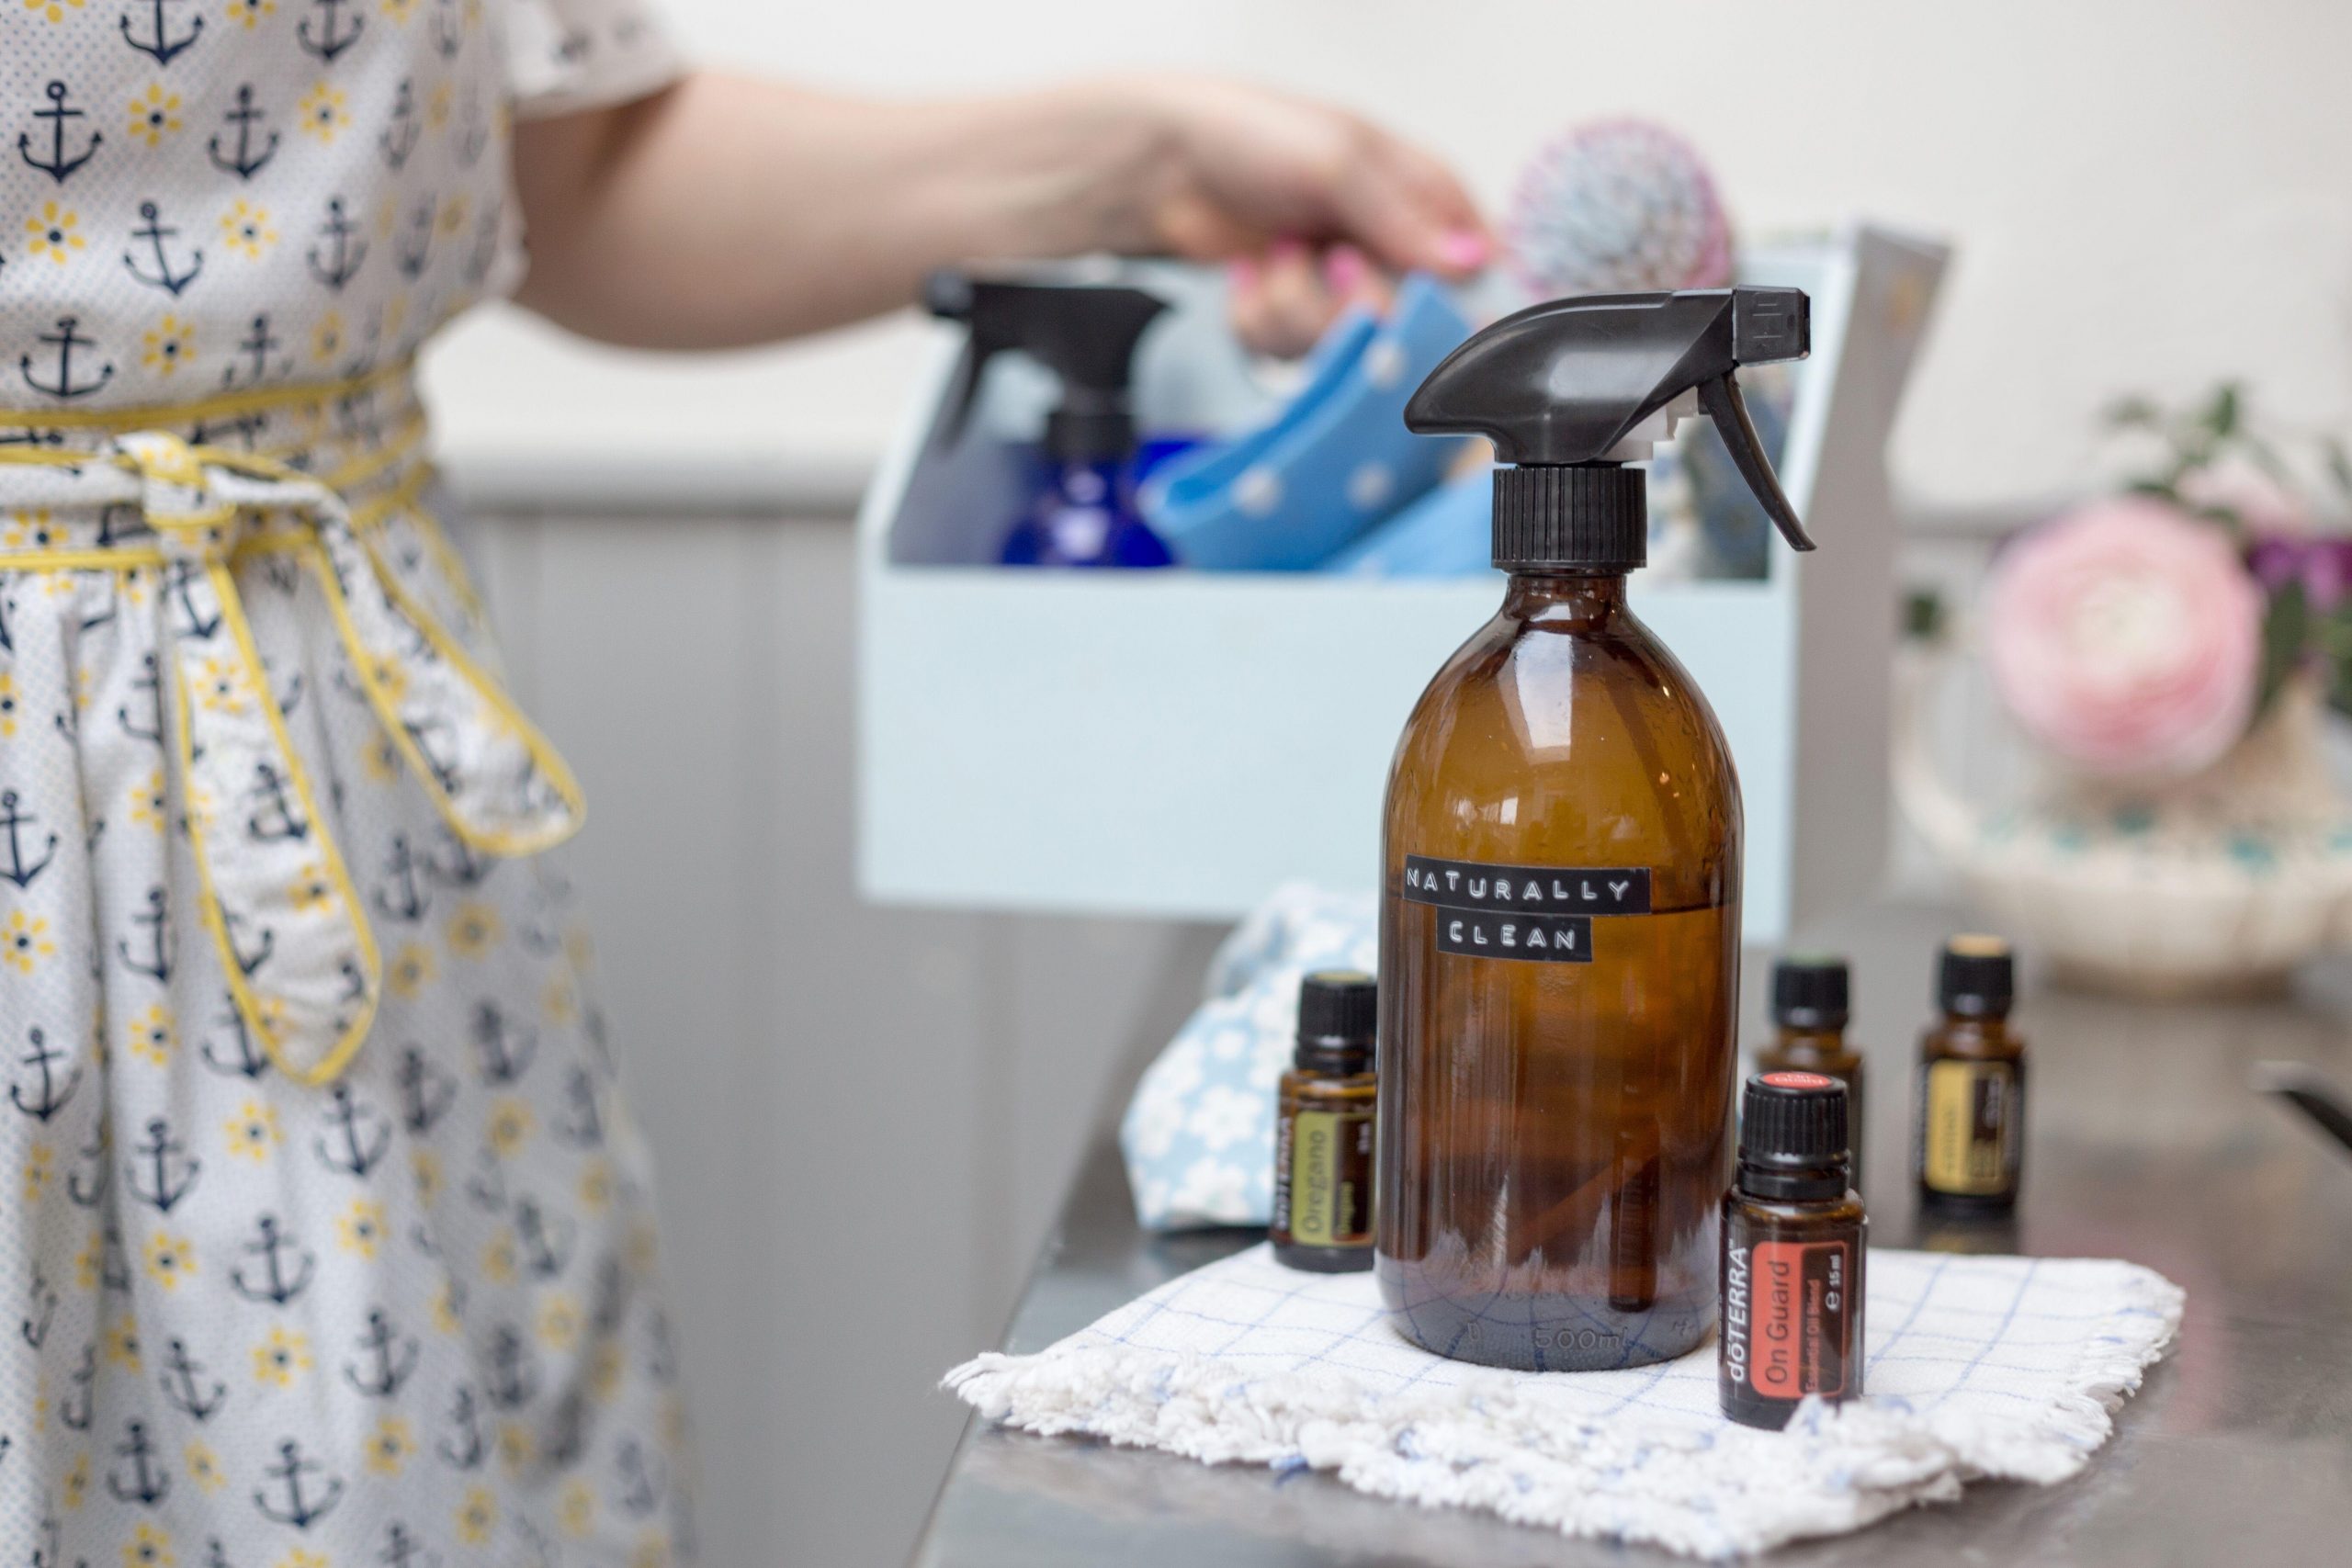 How to Make The DoTerra On Guard Essential Oil Blend - There's an